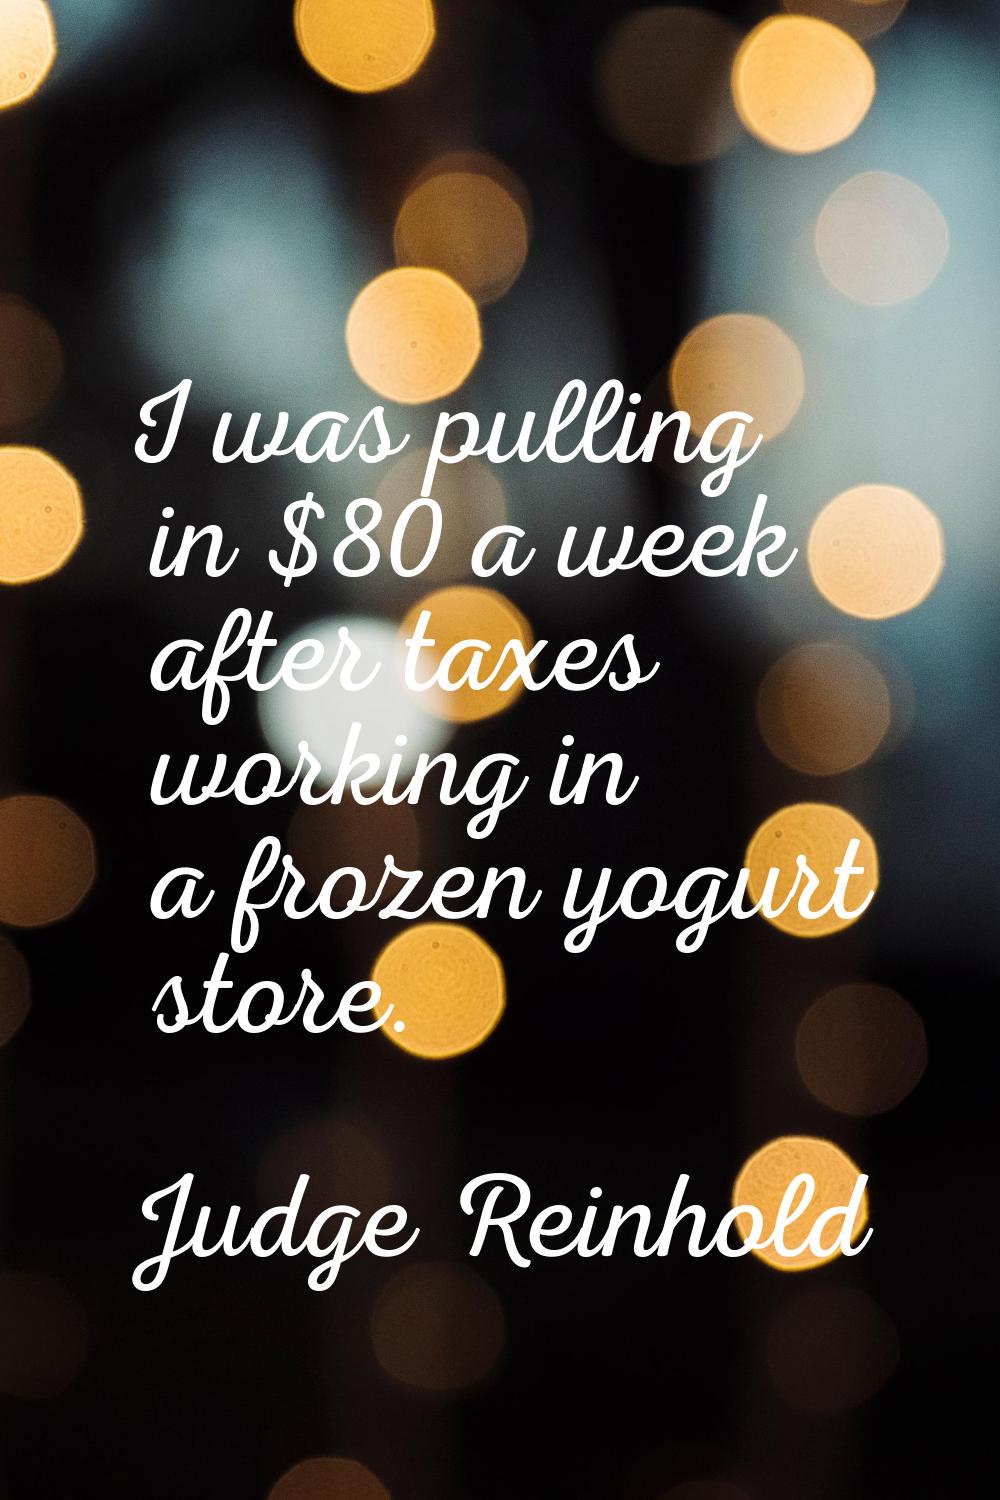 I was pulling in $80 a week after taxes working in a frozen yogurt store.